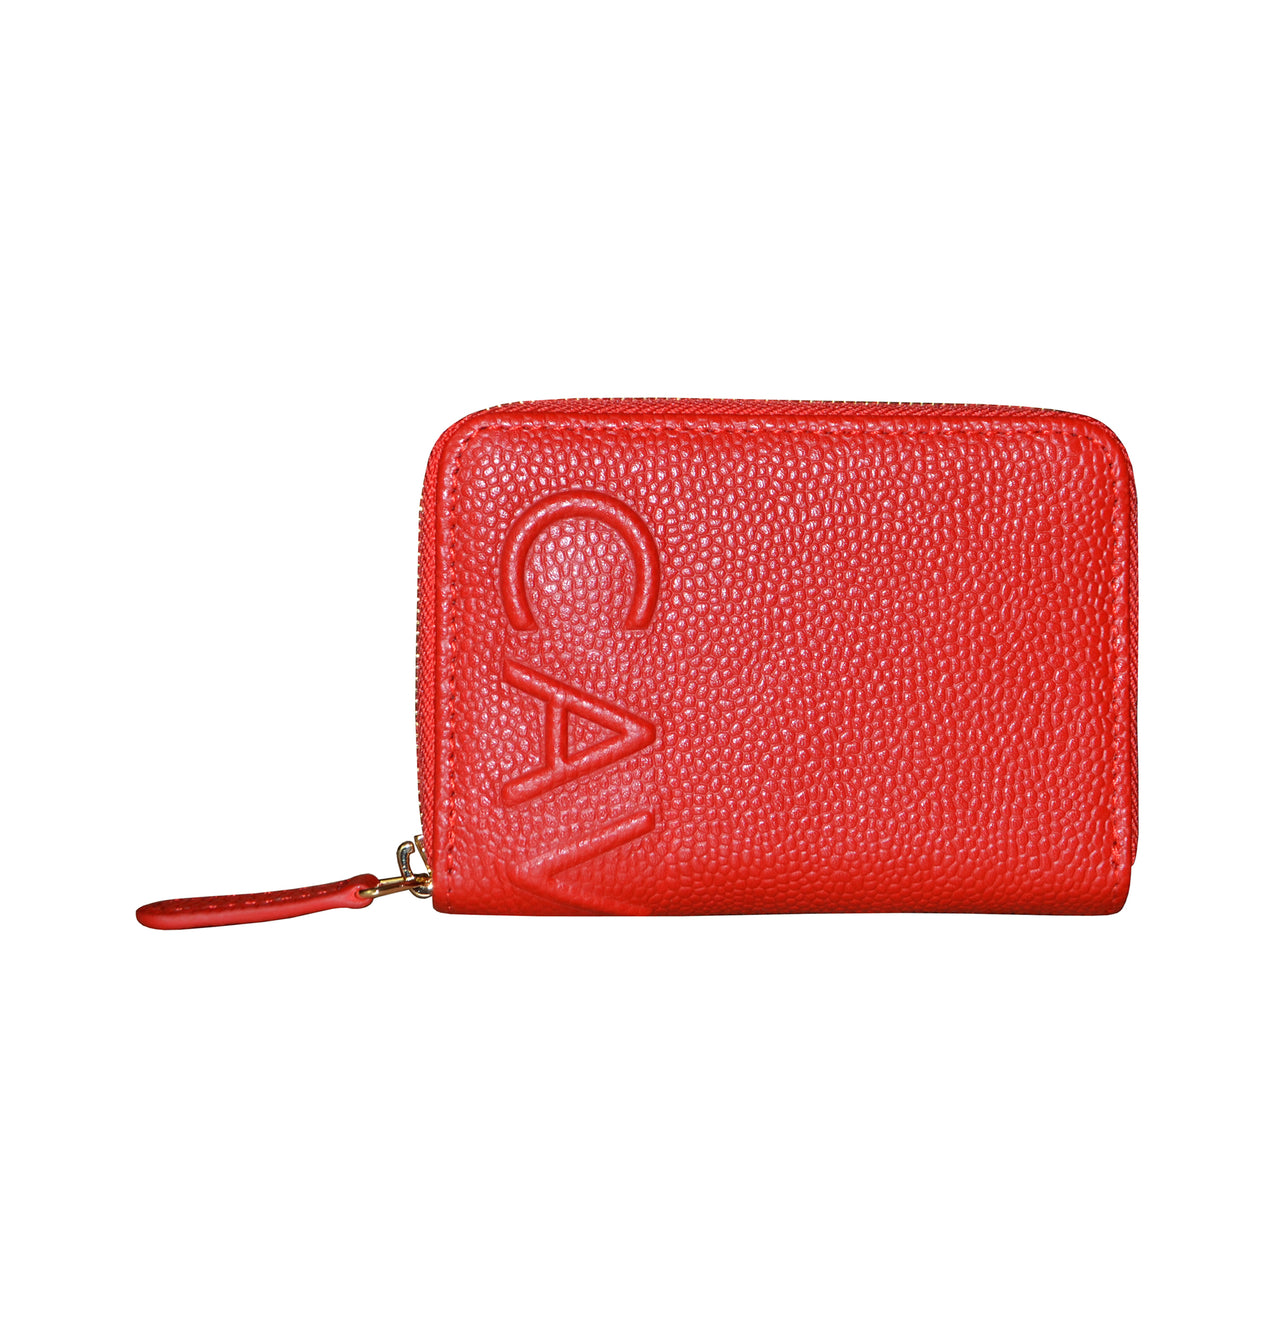 ZIPPY COIN PURSE IN RED